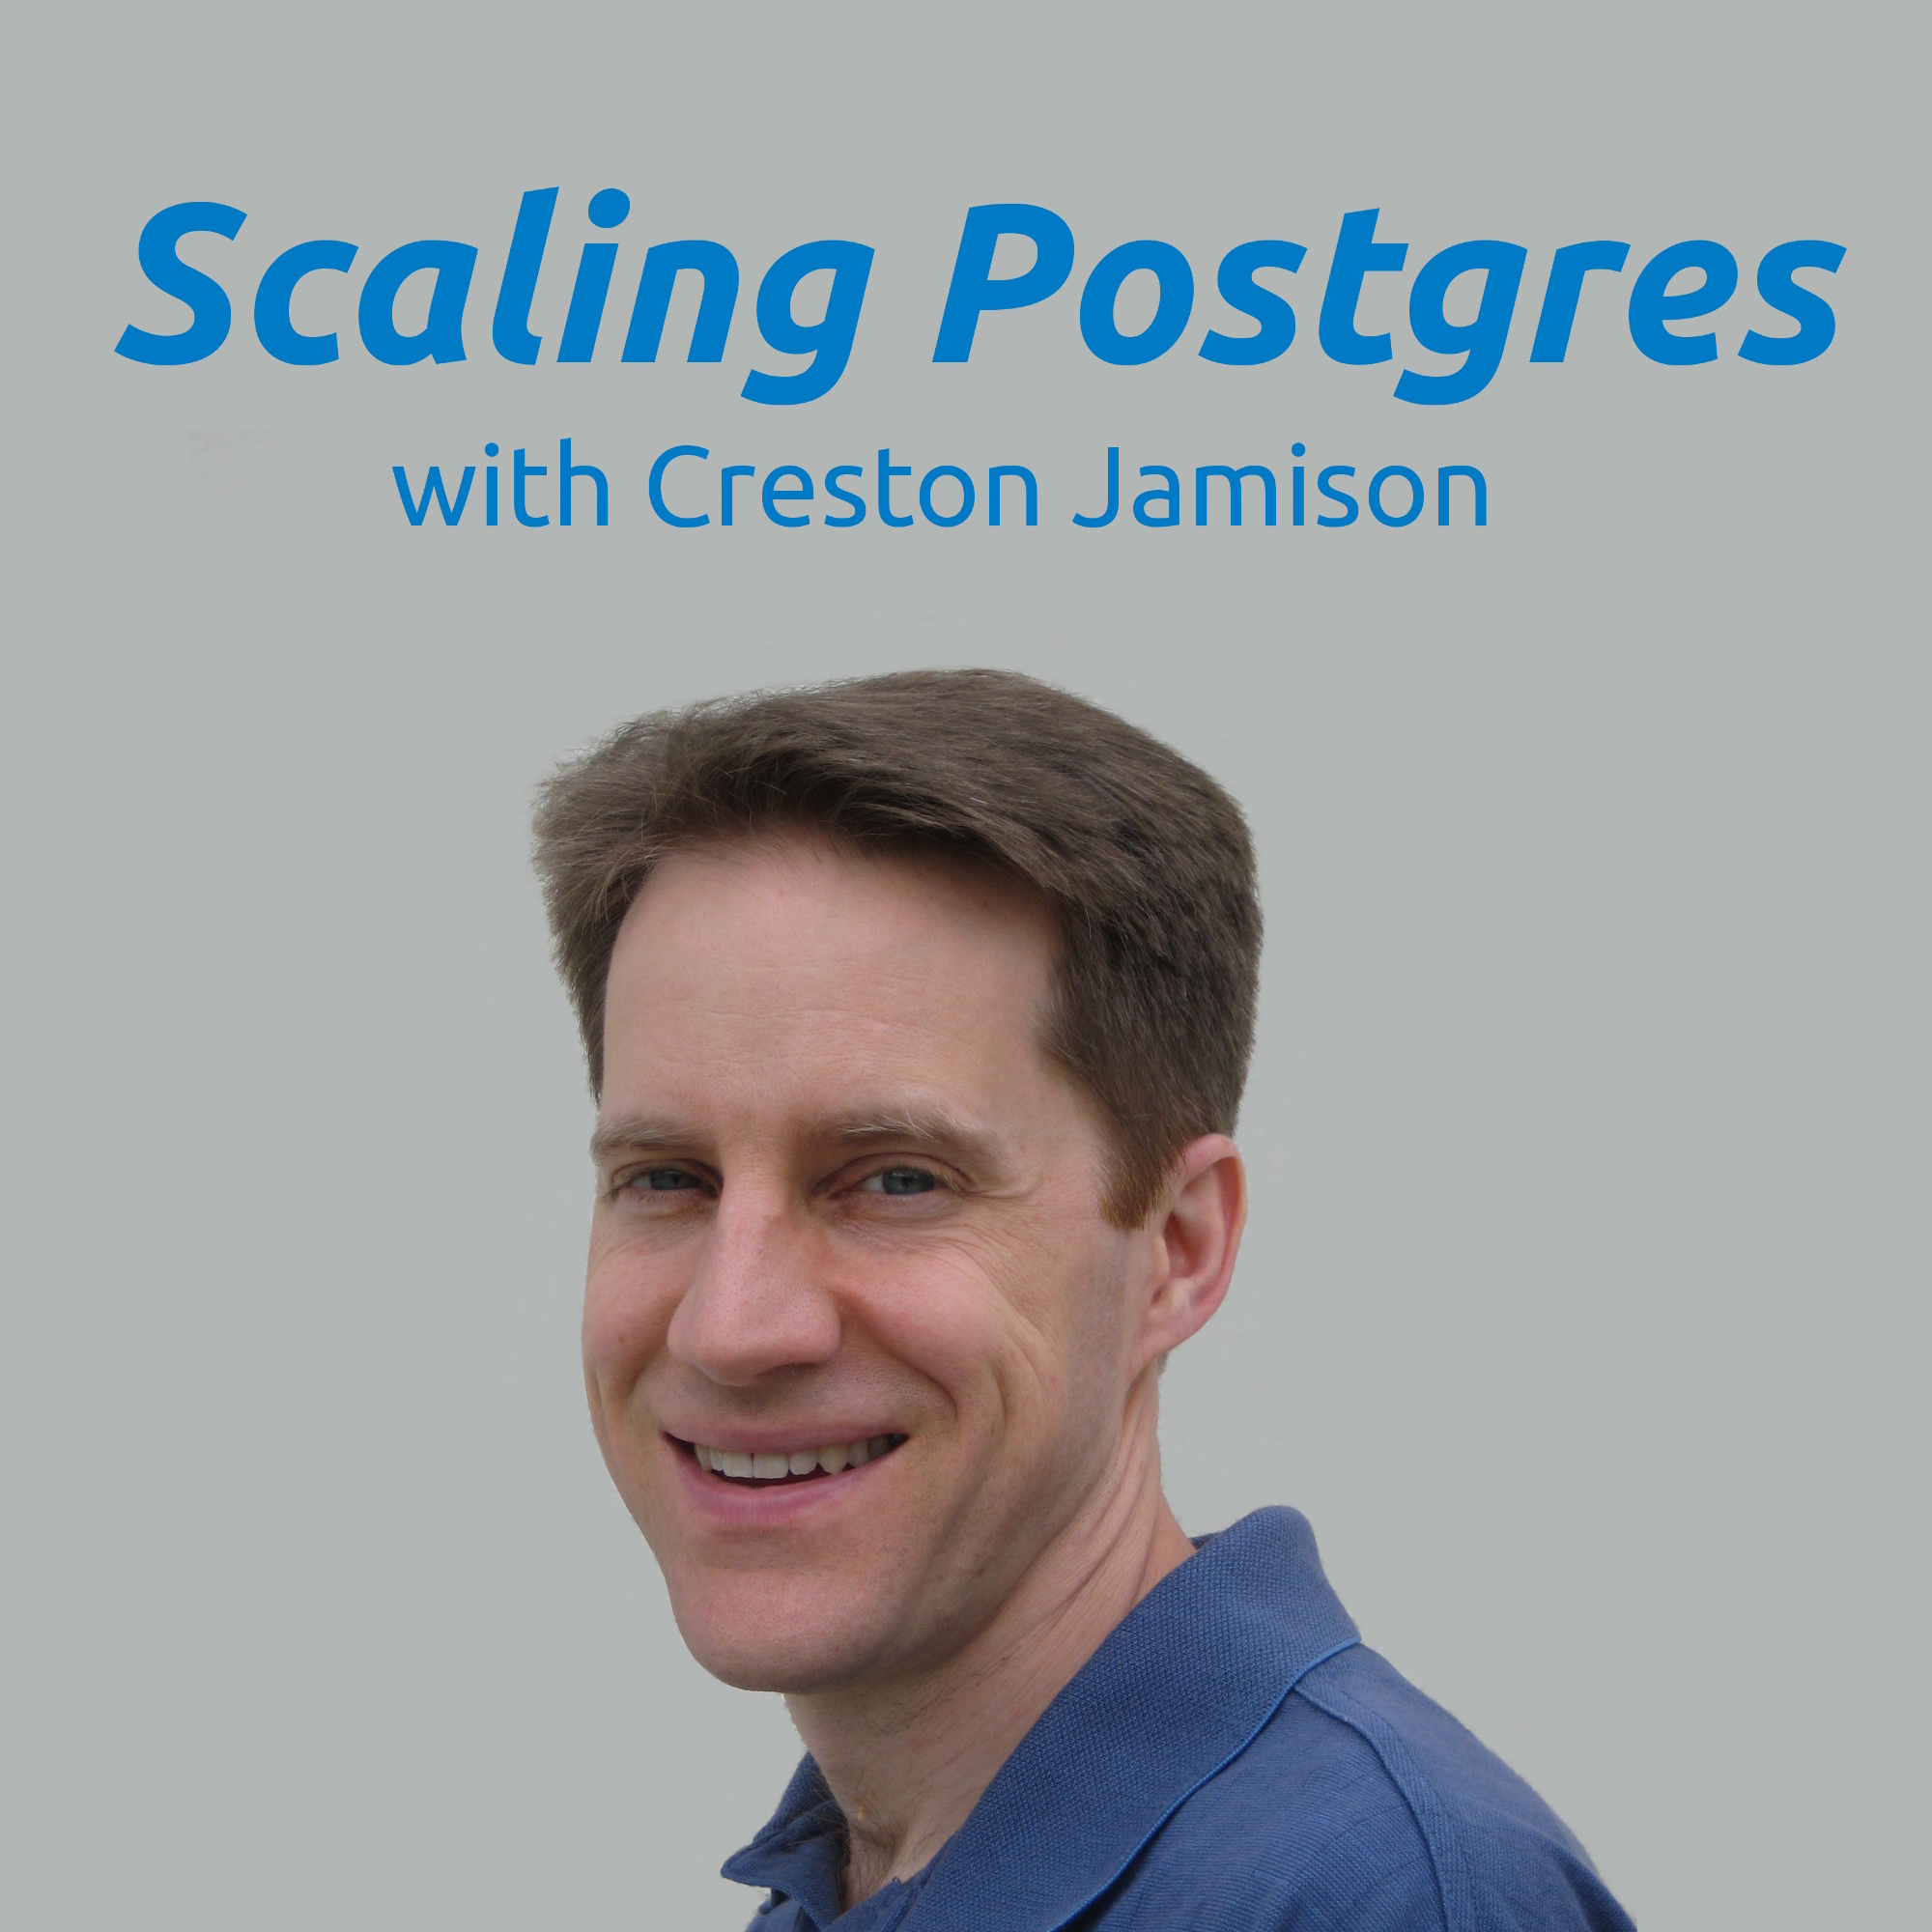 arm64 with apt, Contributors, Backup Manifest, Now Functions | Scaling Postgres 113